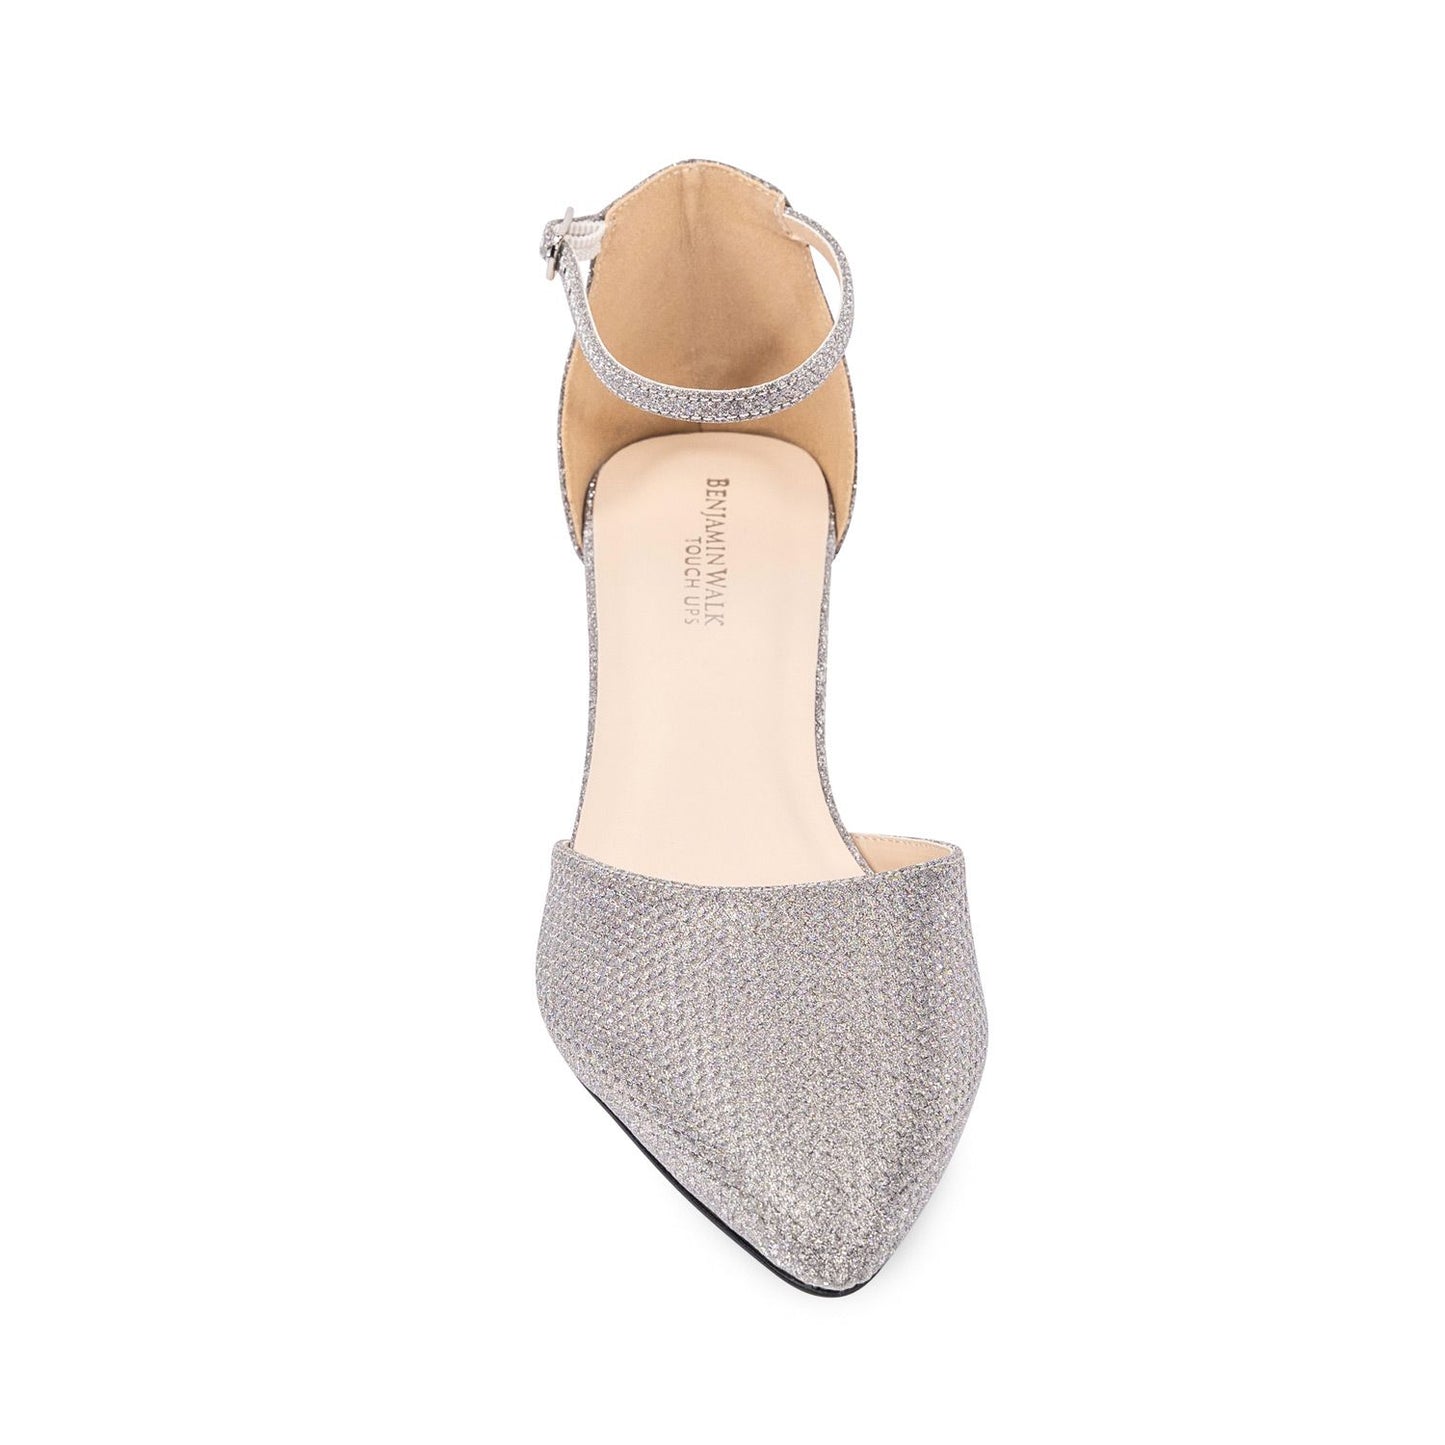 Front view of Closed toe shimmer shoe with 1.75 inch block heel